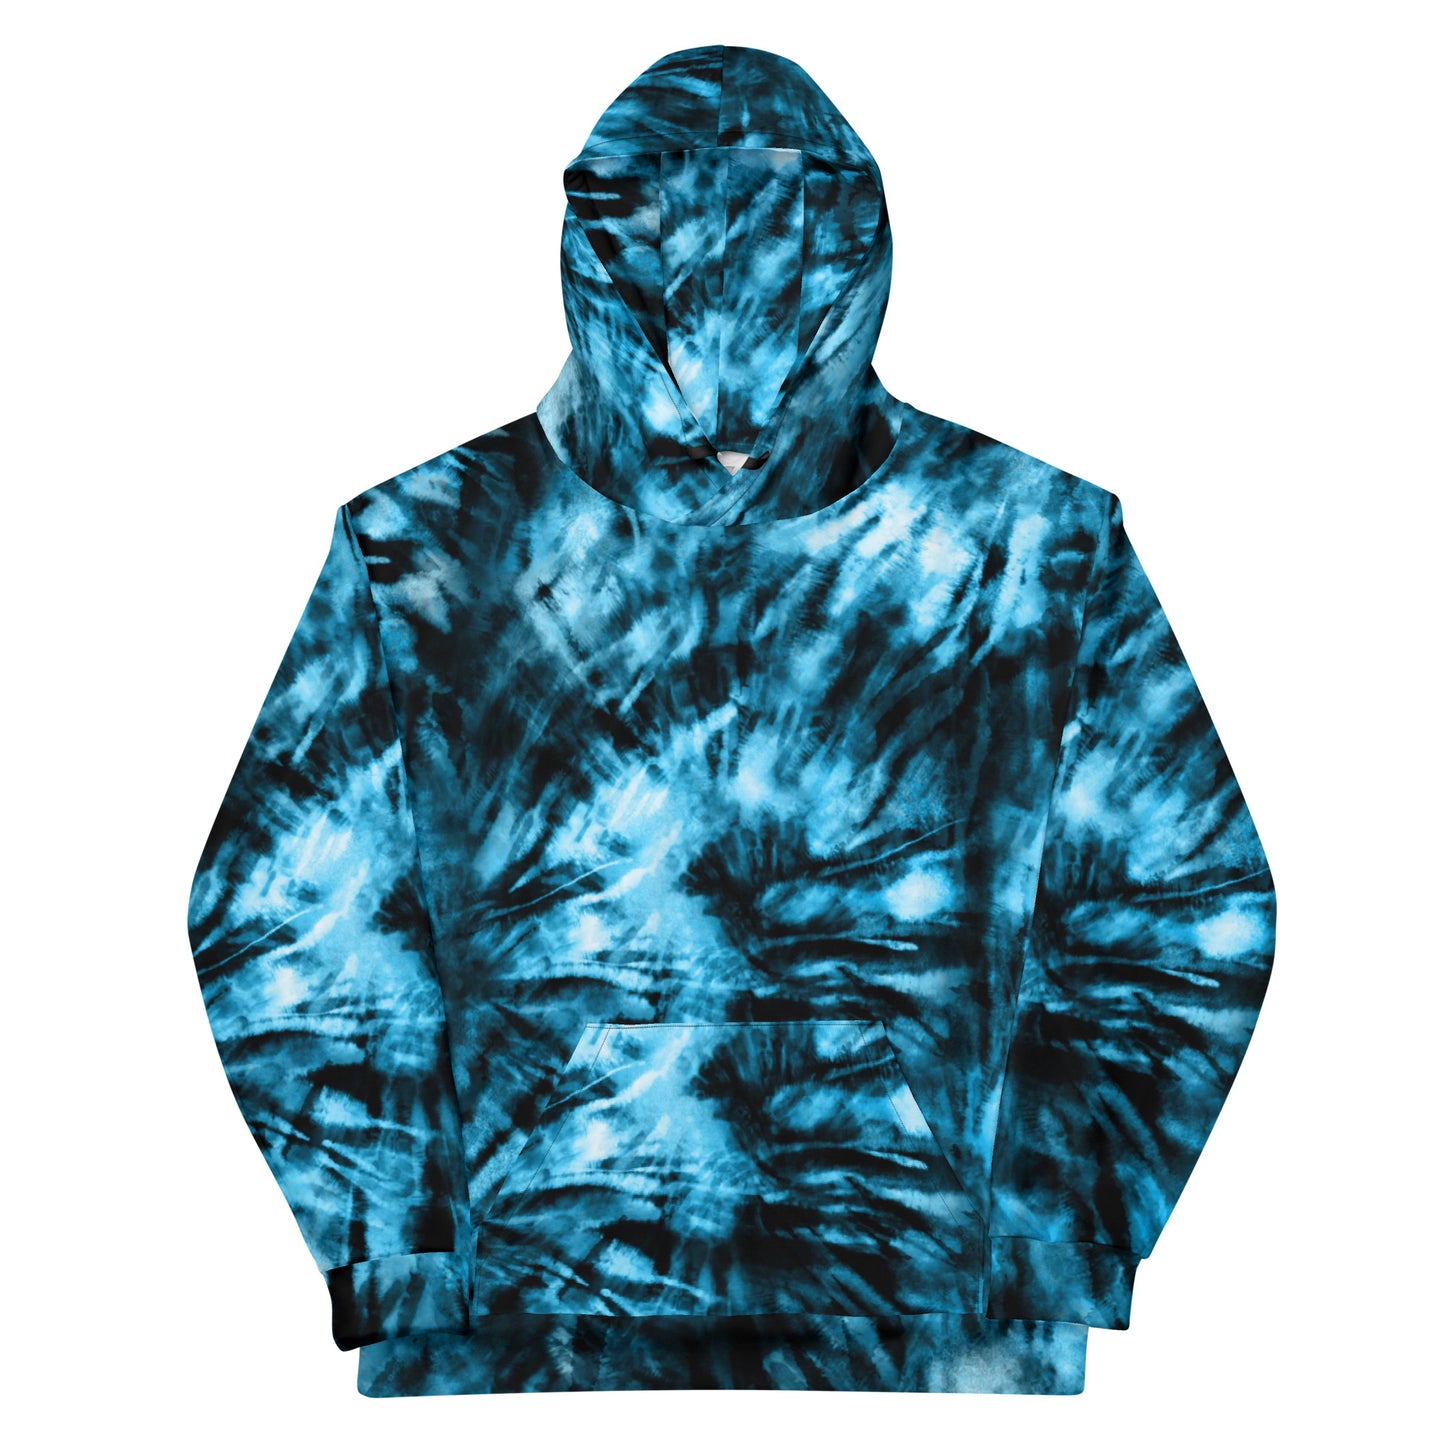 Blue Tie Dye Hoodie, Pullover Men Women Adult Aesthetic Graphic Cotton Hooded Sweatshirt with Pockets